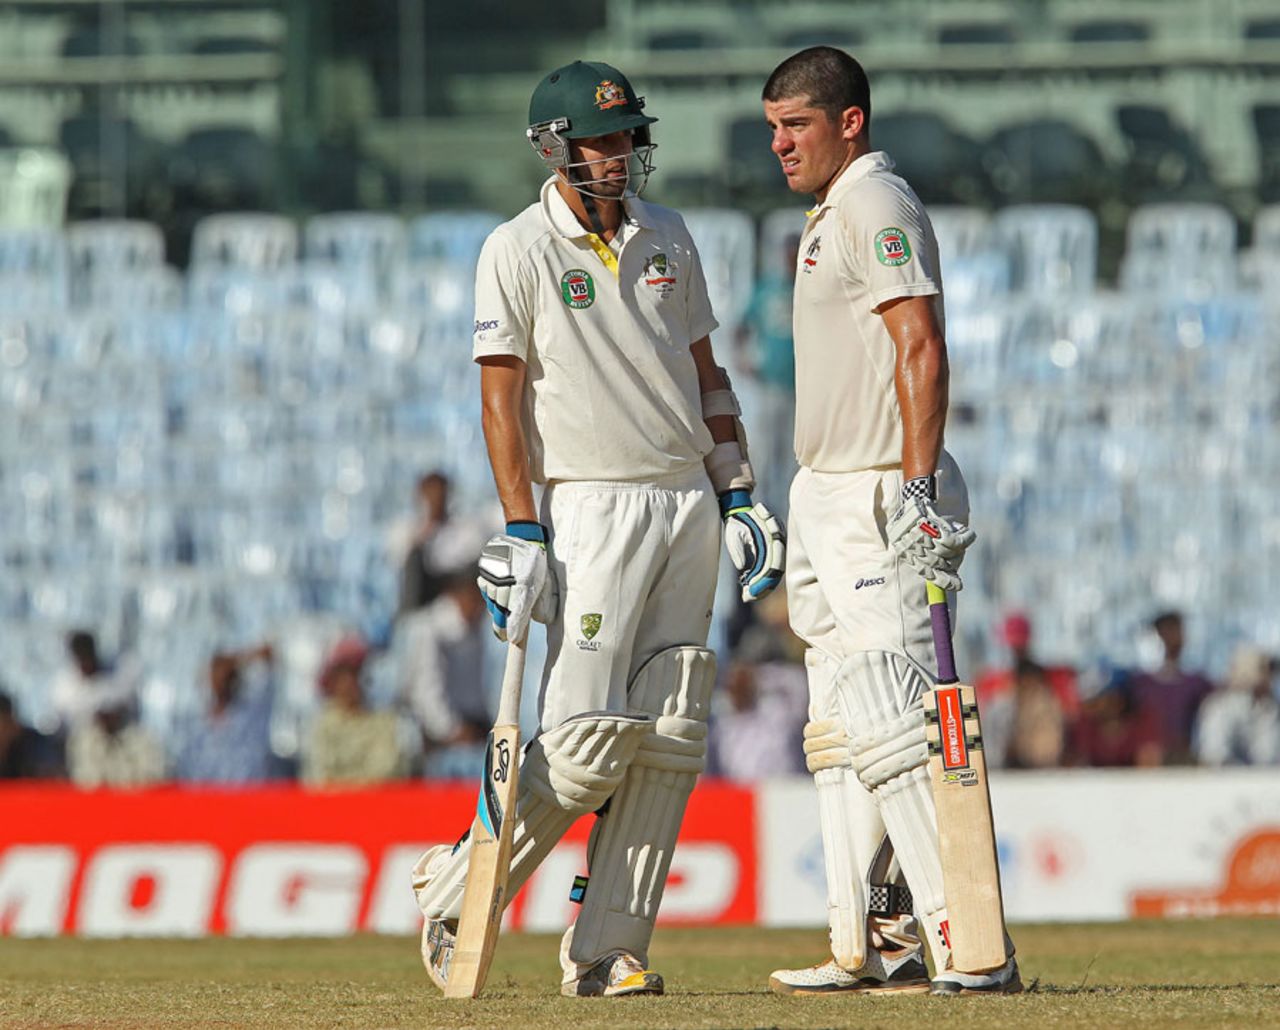 Nathan Lyon and Moises Henriques added 57 late in the day, India v Australia, 1st Test, Chennai, 4th day, February 25, 2013